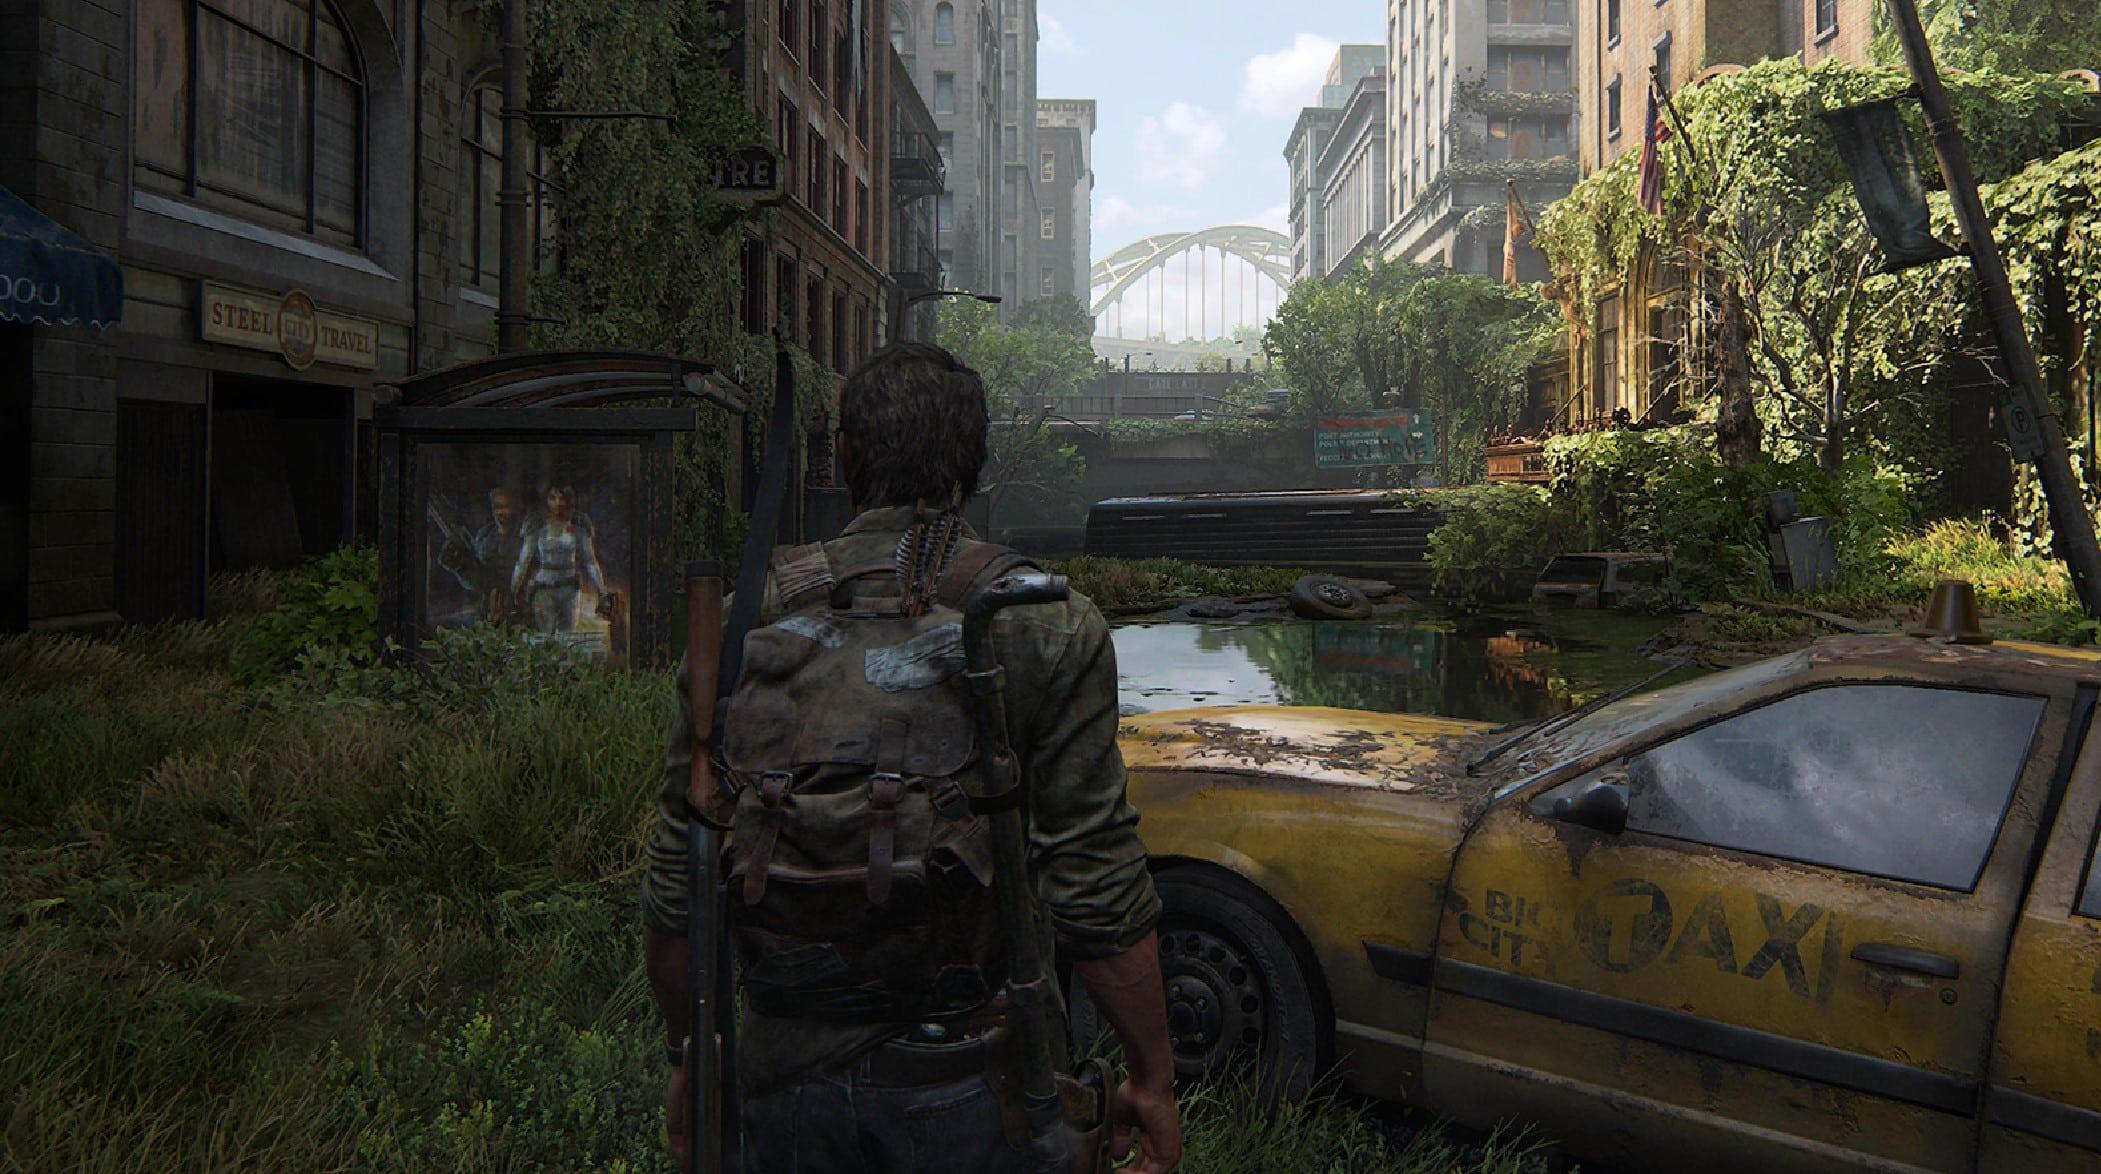 The Last of Us' First Look Image and Remake Announcement